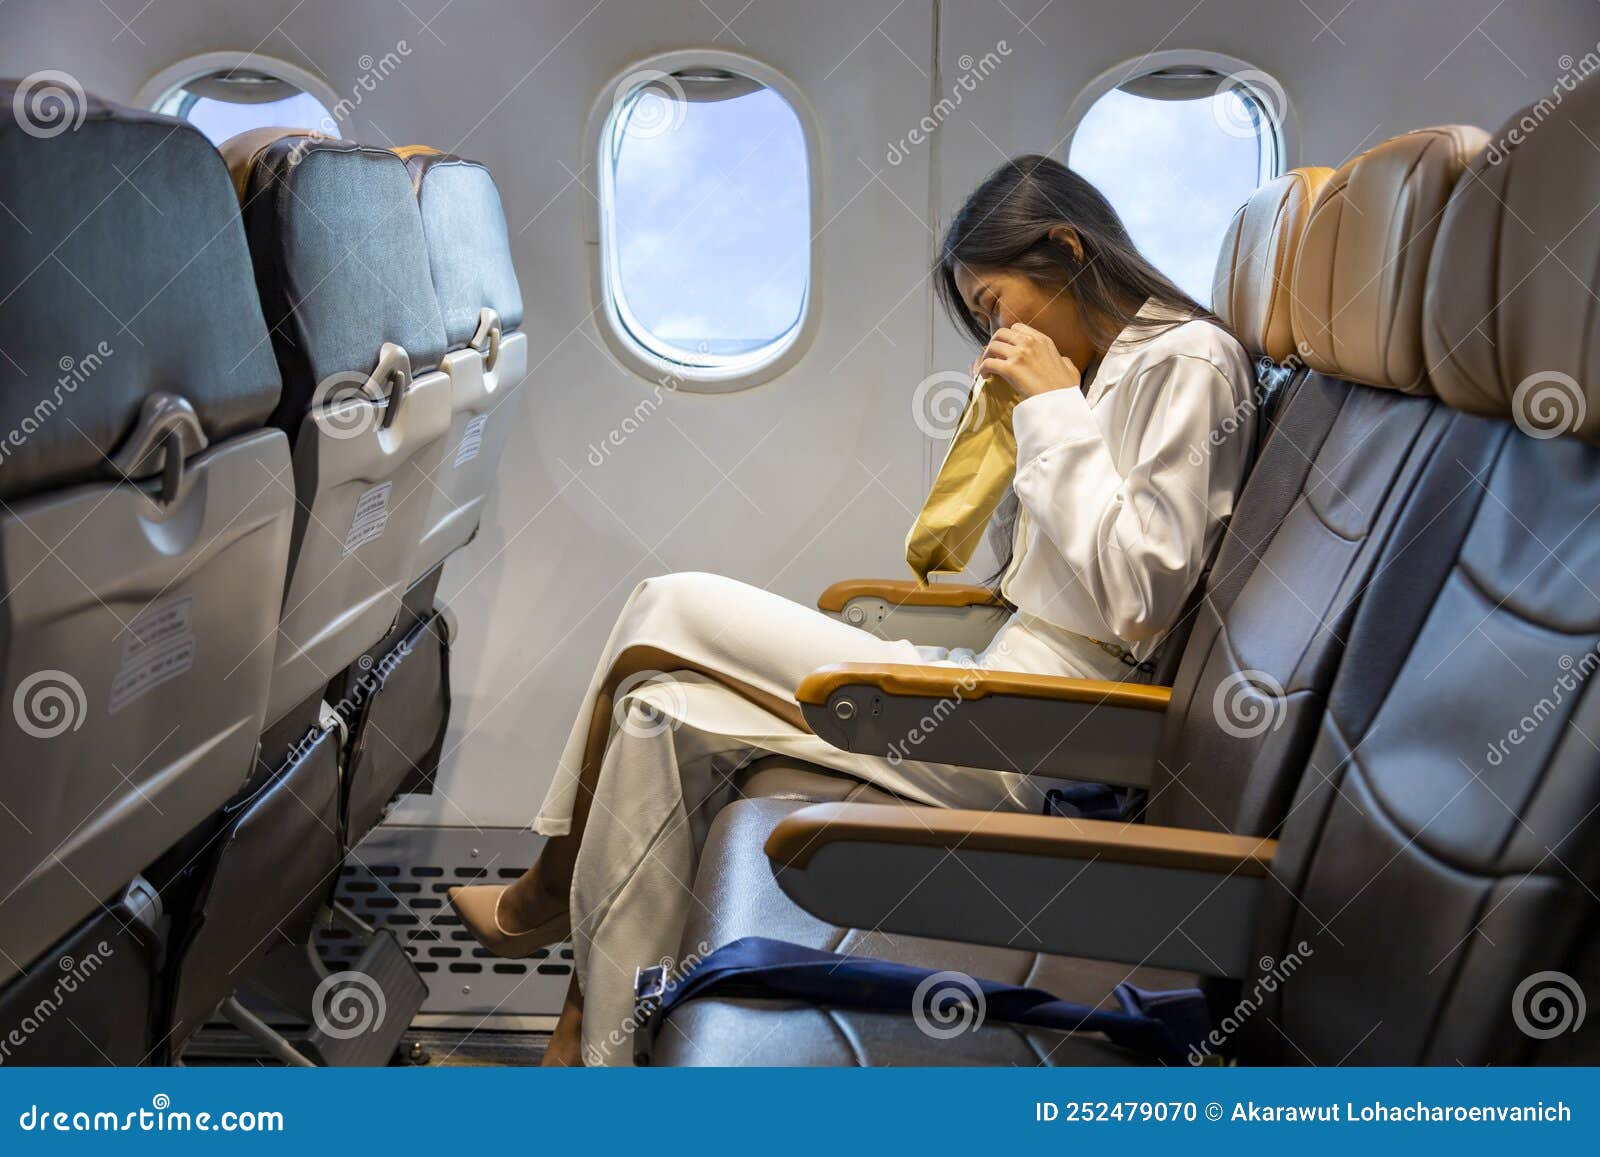 Sick  travel motion sickness bag for safe collection  holding of vomit if  someone is ill in the back of a plane seat during an airplane flight 112  Stock Photo  Alamy